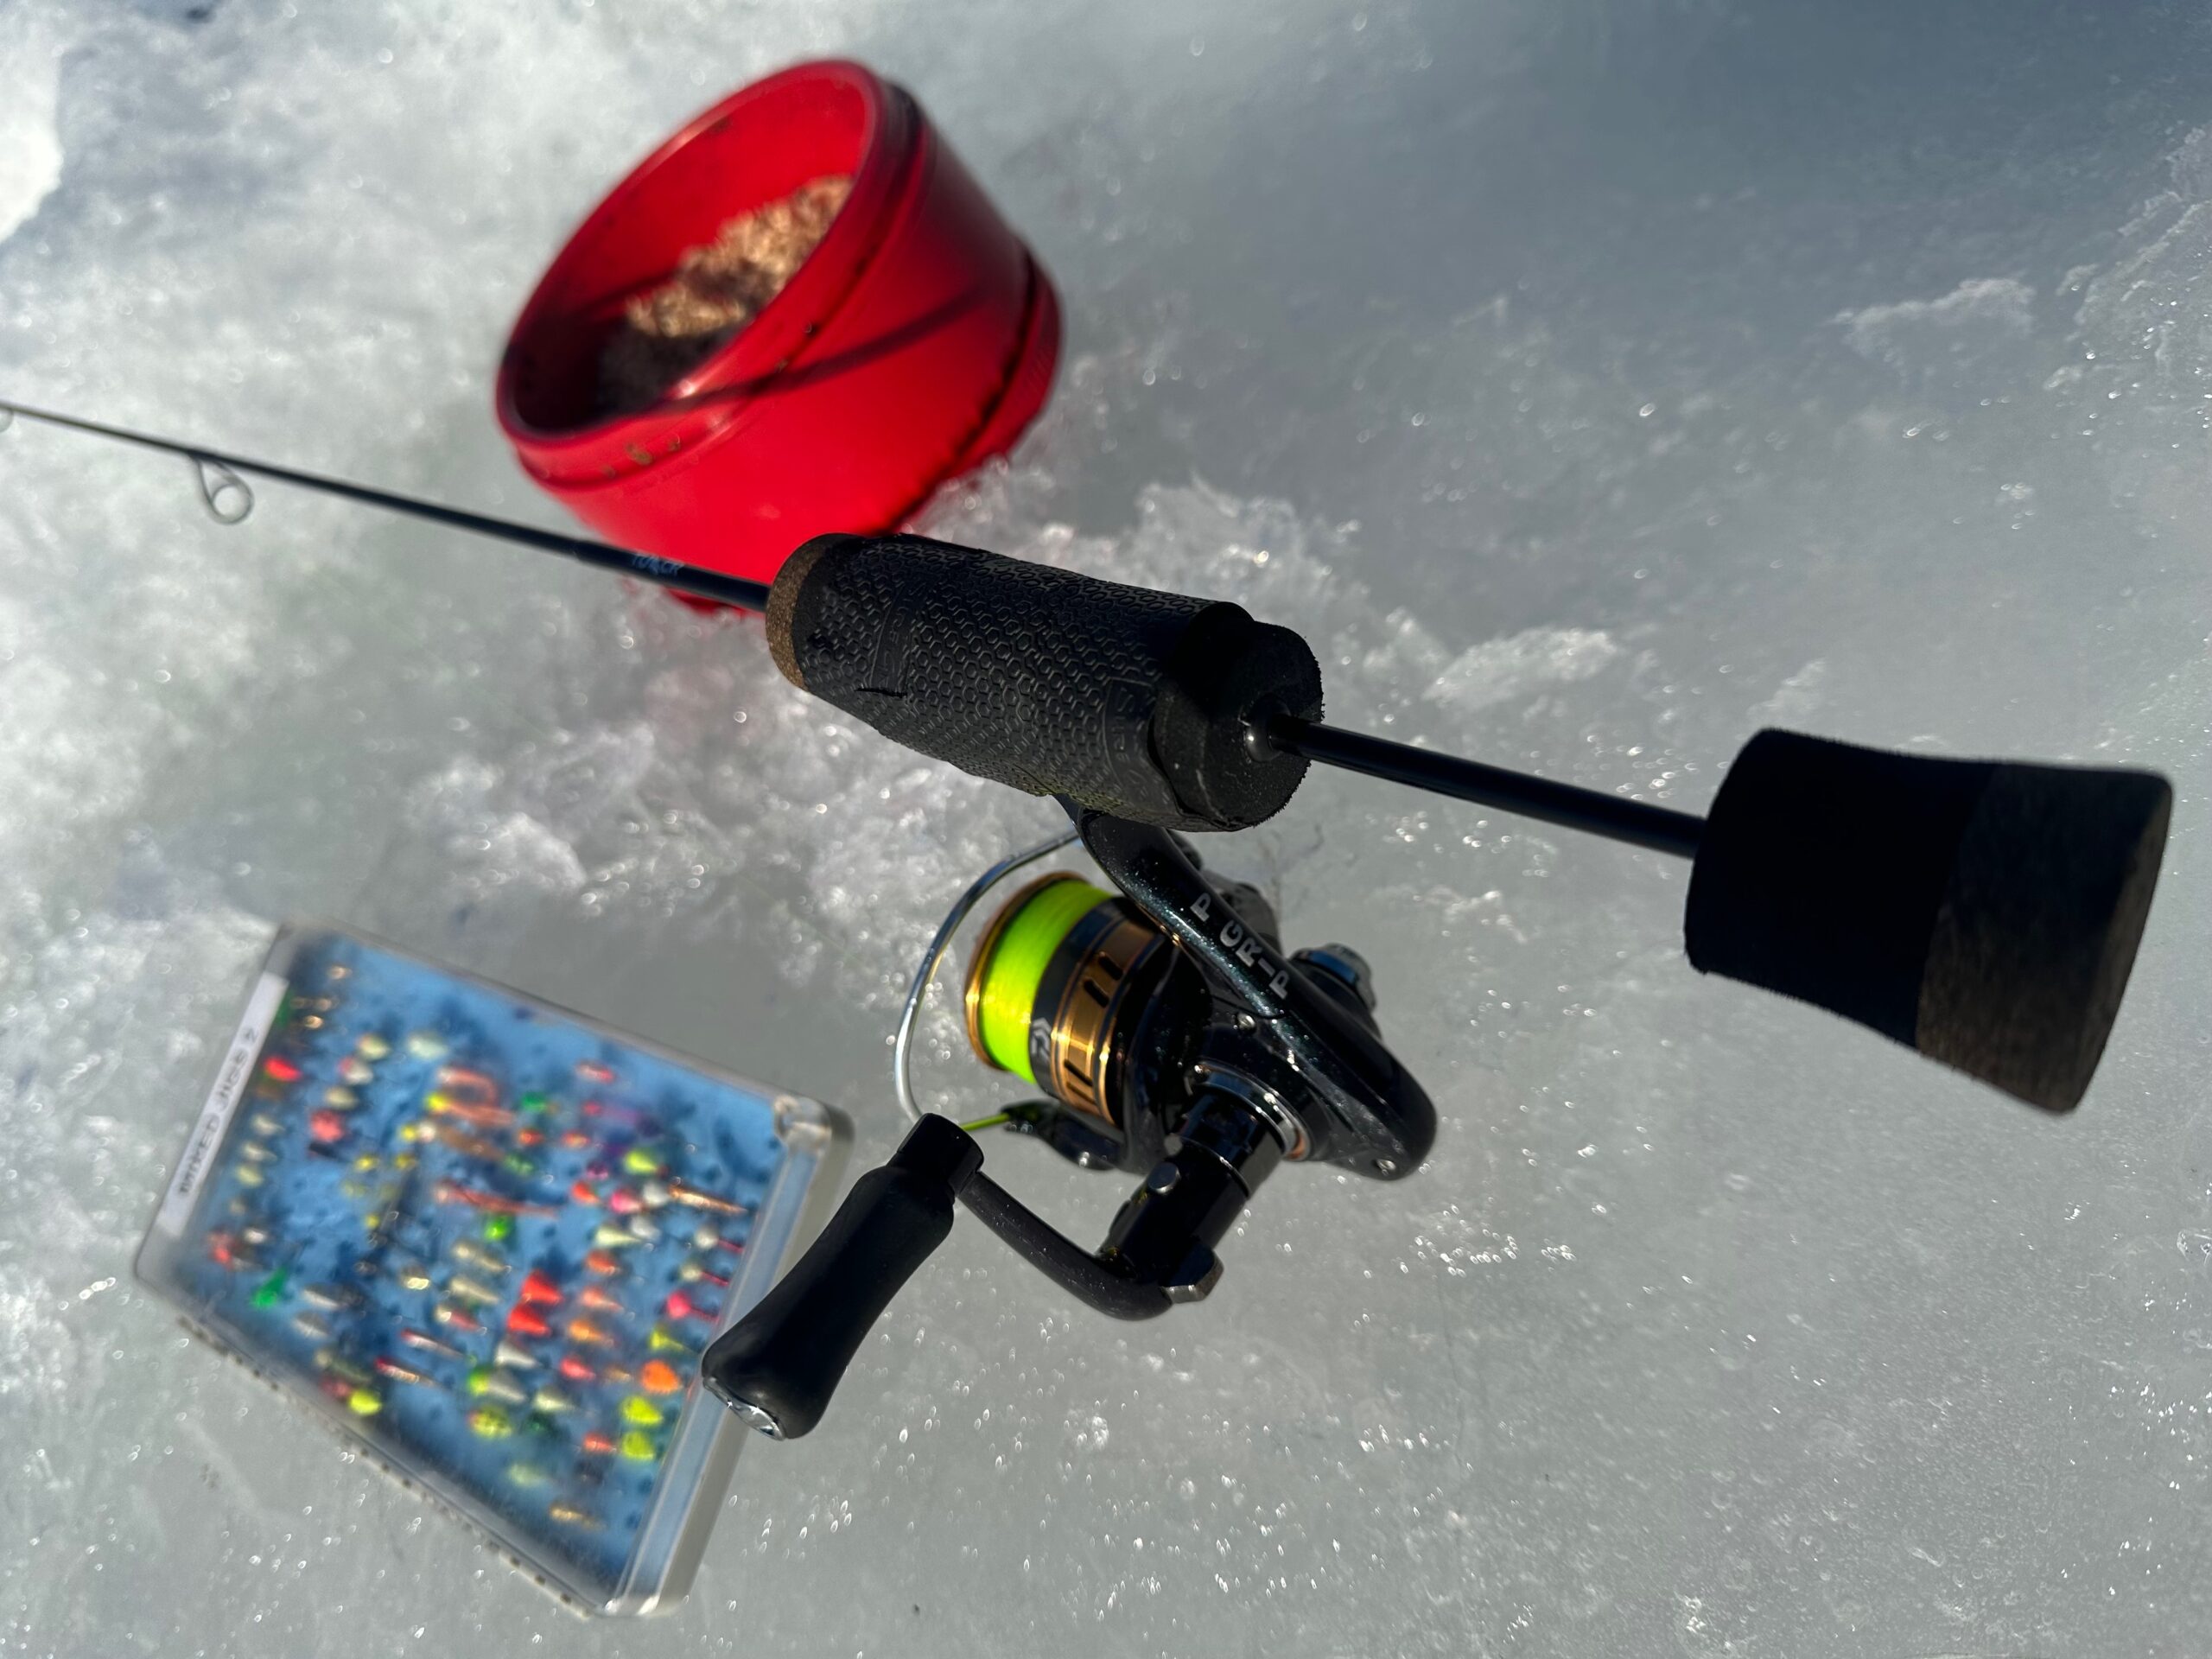 Ice Fishing Rod Pole Gear Equipment For Walleye Perch Crappie Pike